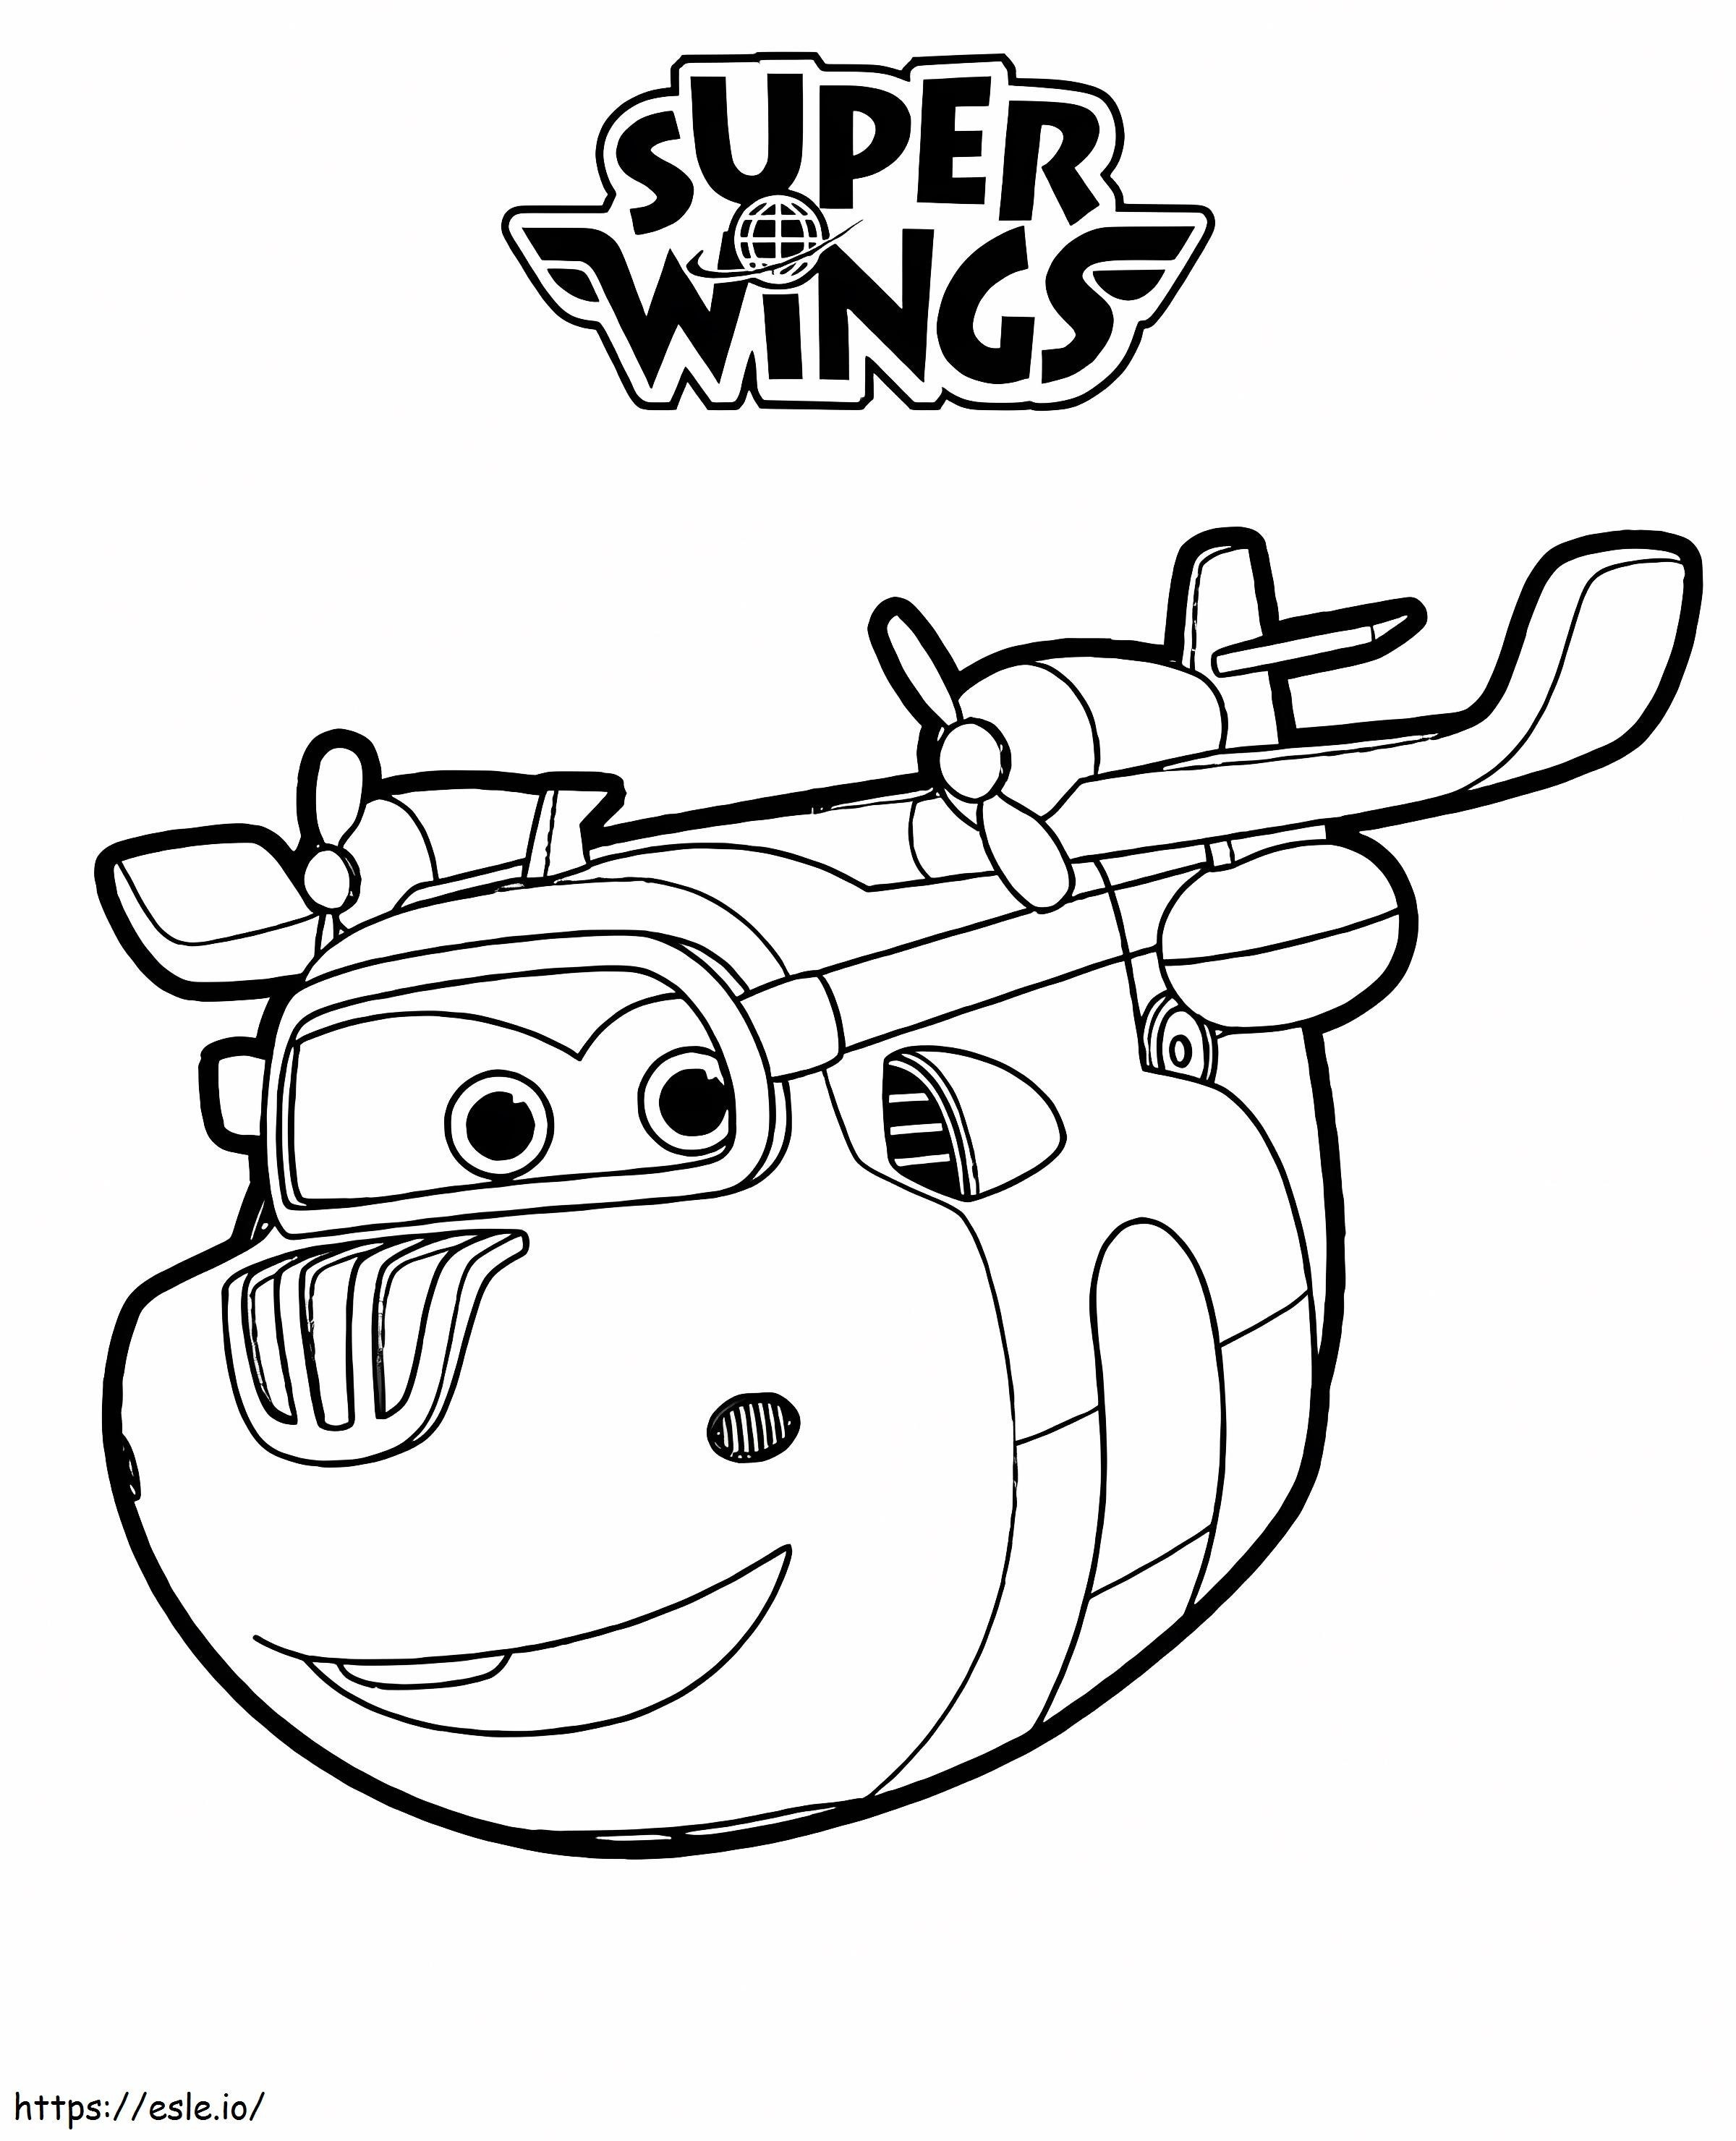 Donnie Super Wings 1 coloring page